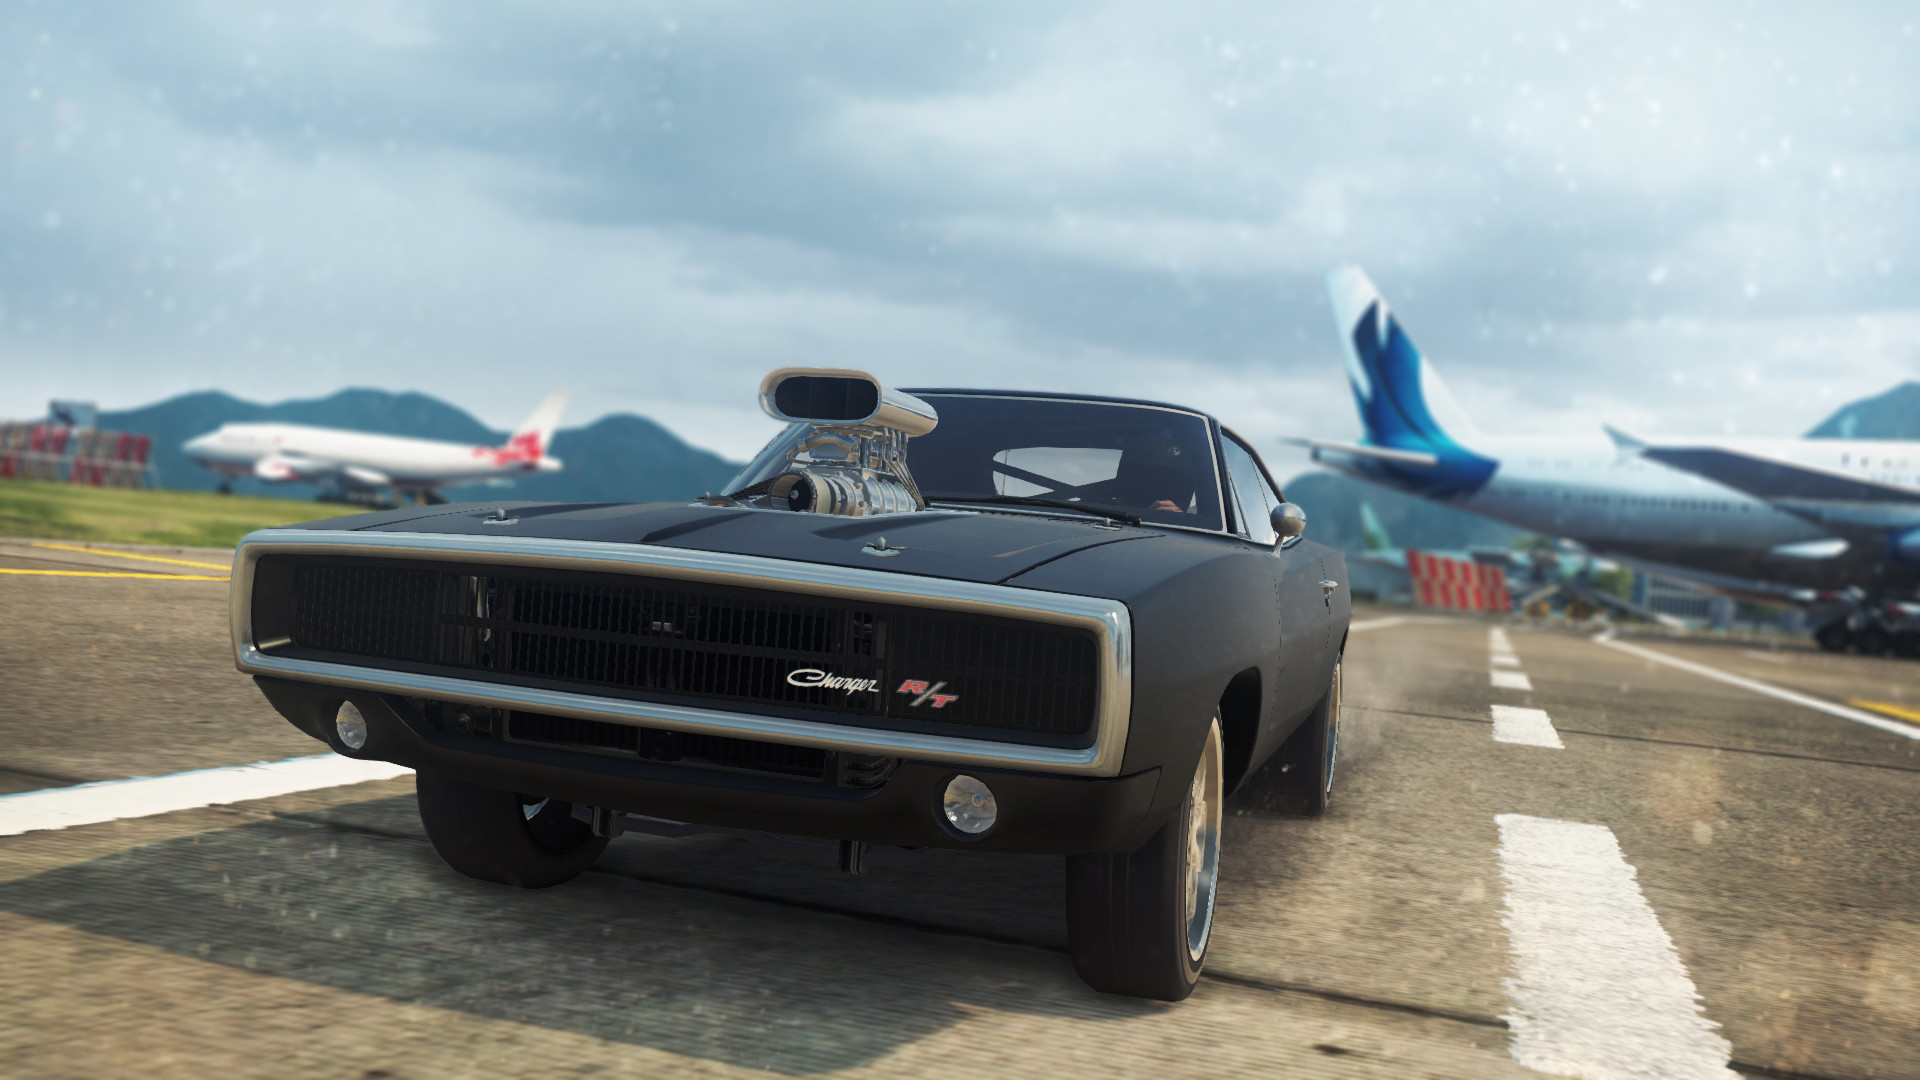 1920x1080 Dodge Charger R/T (1970) | Need for Speed Wiki | FANDOM powered by Wikia